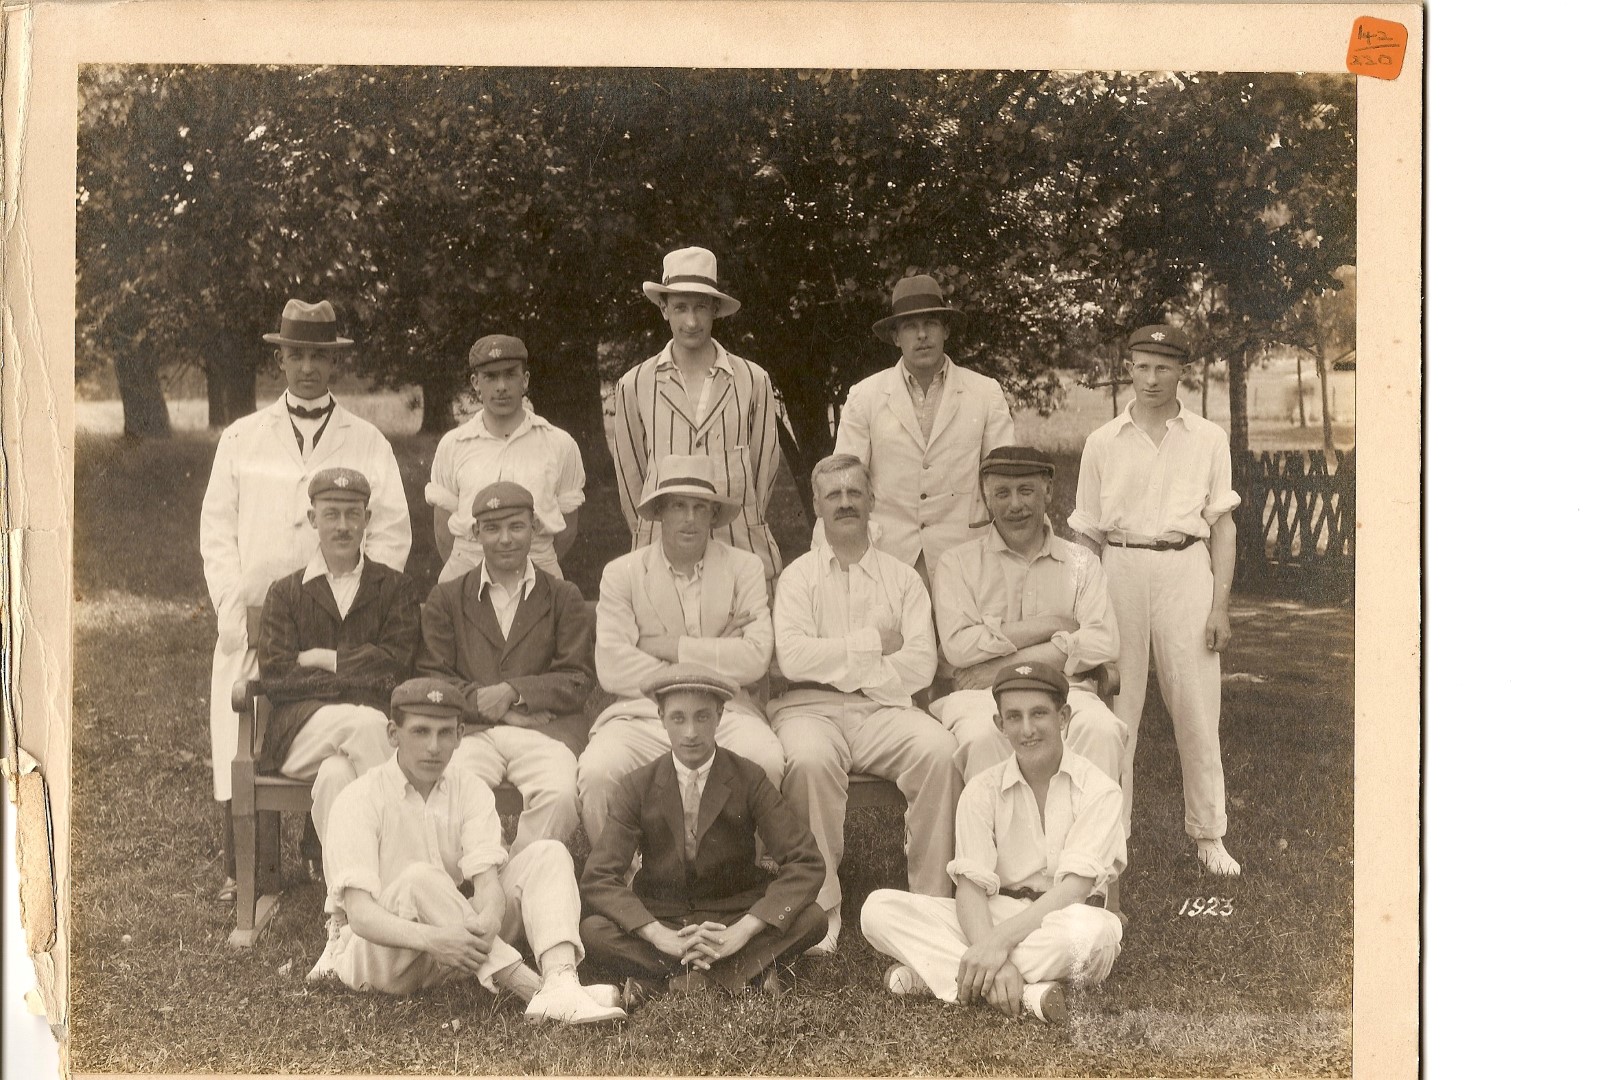 13 men seated in rows wearing old fashioned cricket kit and hats